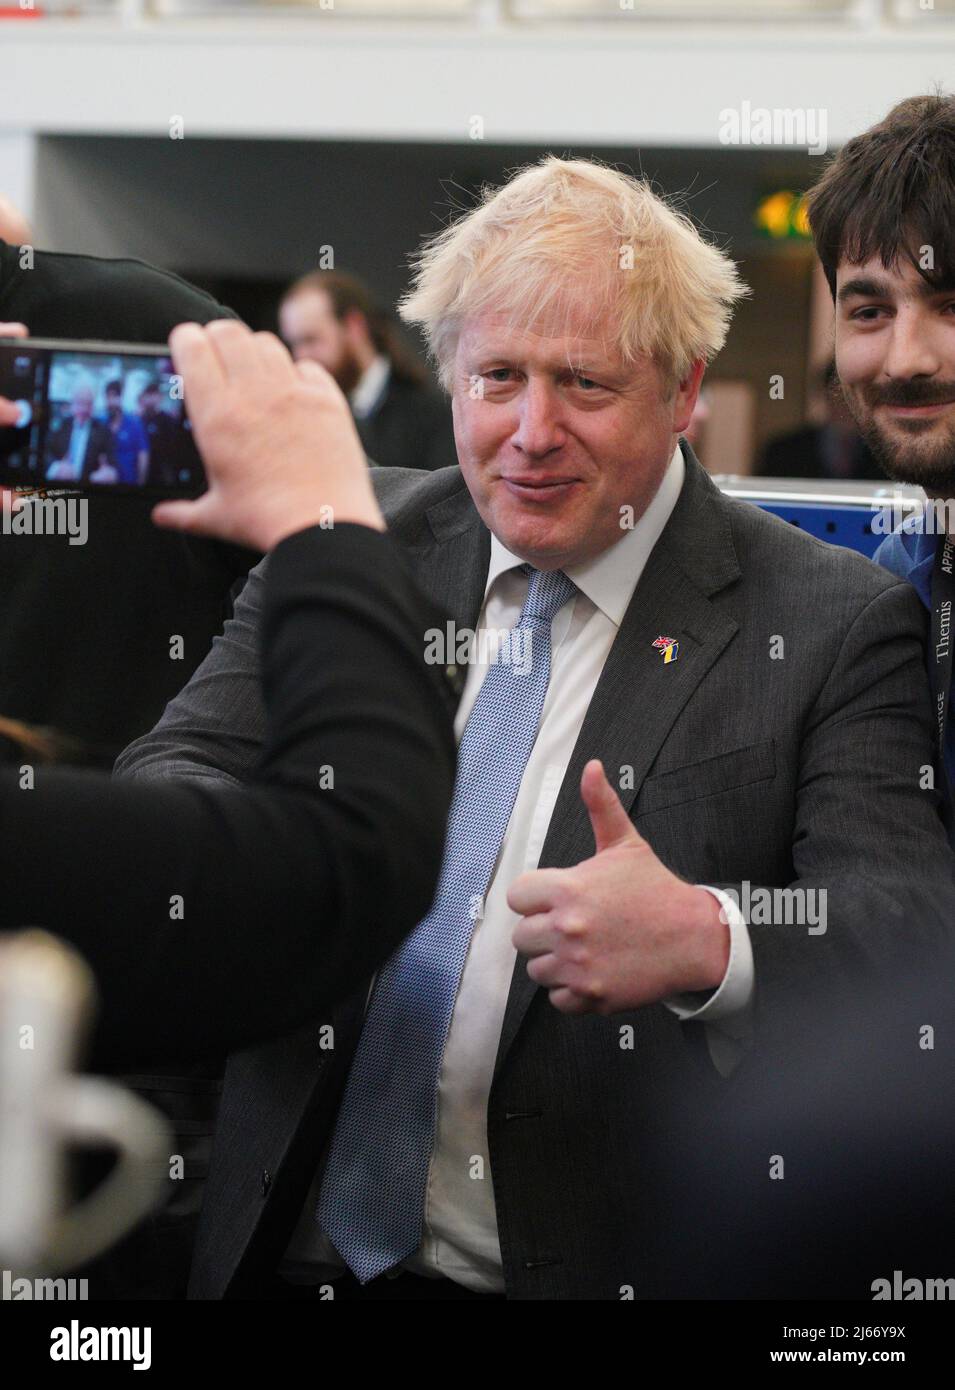 Britain's Prime Minister Boris Johnson gestures during a campaign visit to Burnley College Sixth Form Centre in Burnley, Lancashire, Britain April 28, 2022. Peter Byrne/Pool via REUTERS Stock Photo